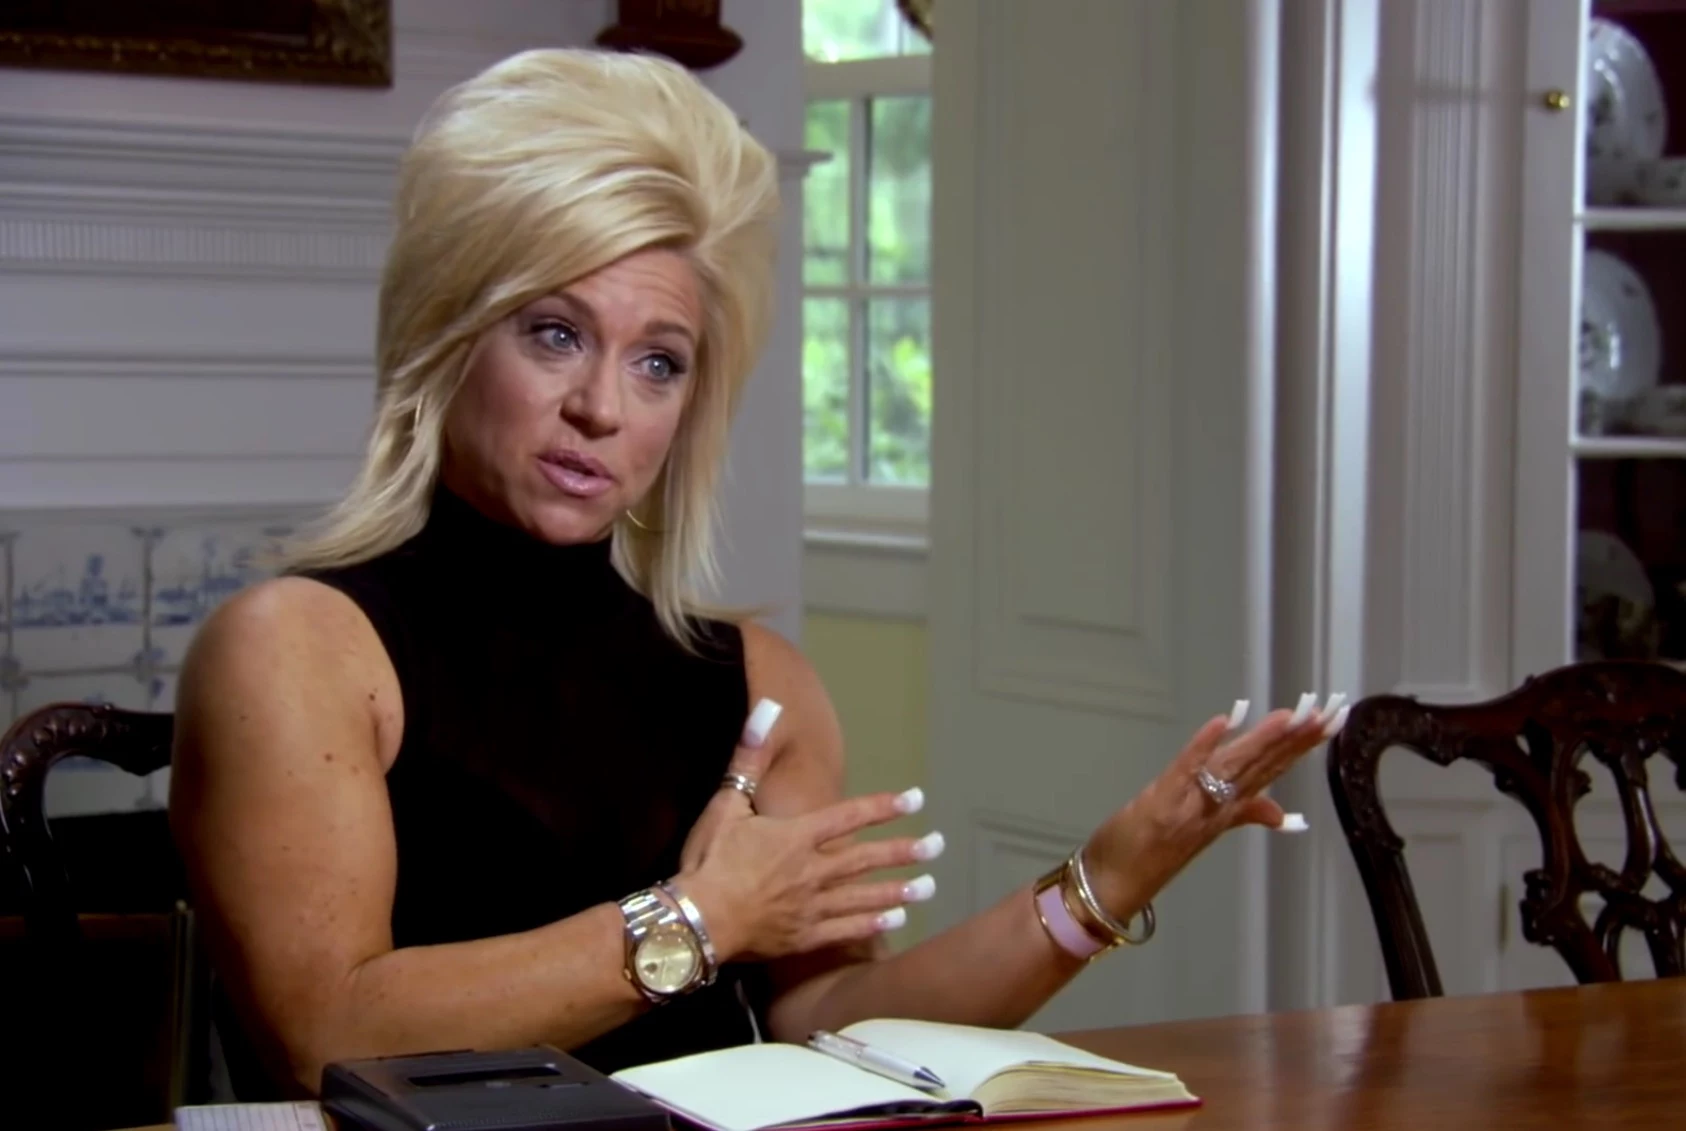 What are some facts about Theresa Caputo from 